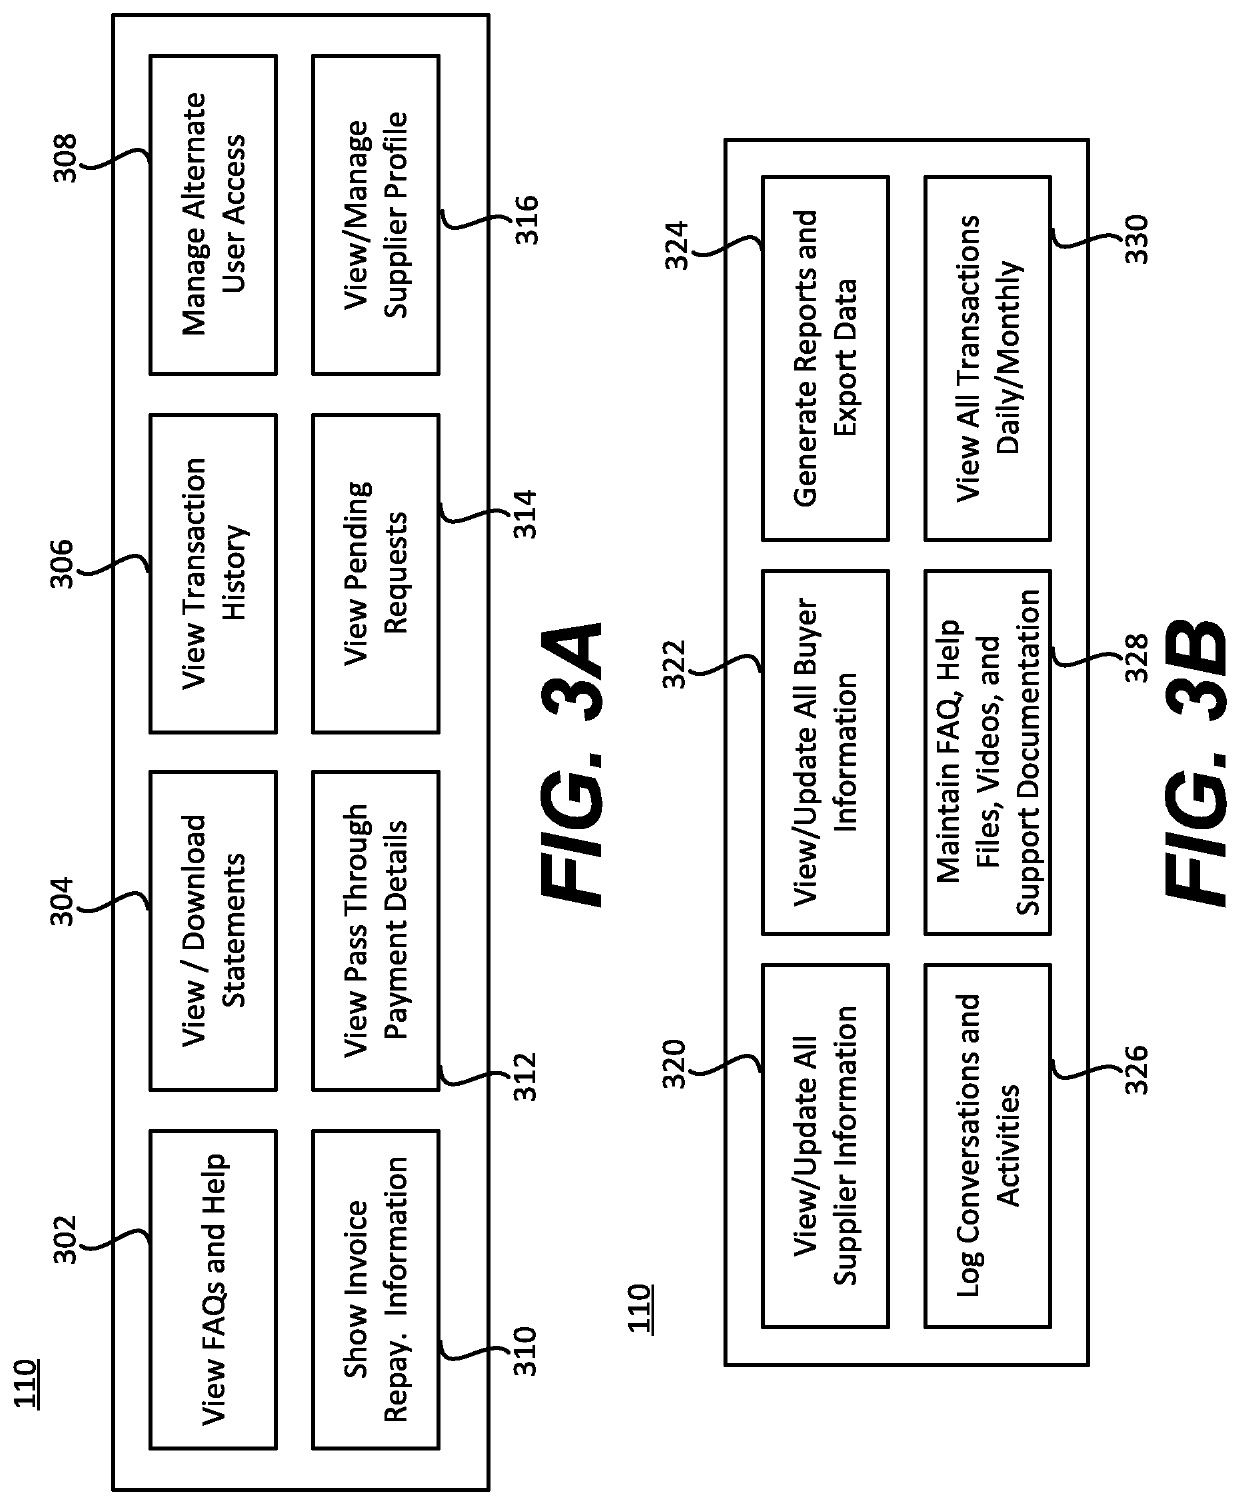 Systems and methods for improving invoice management using enhanced analytical insight